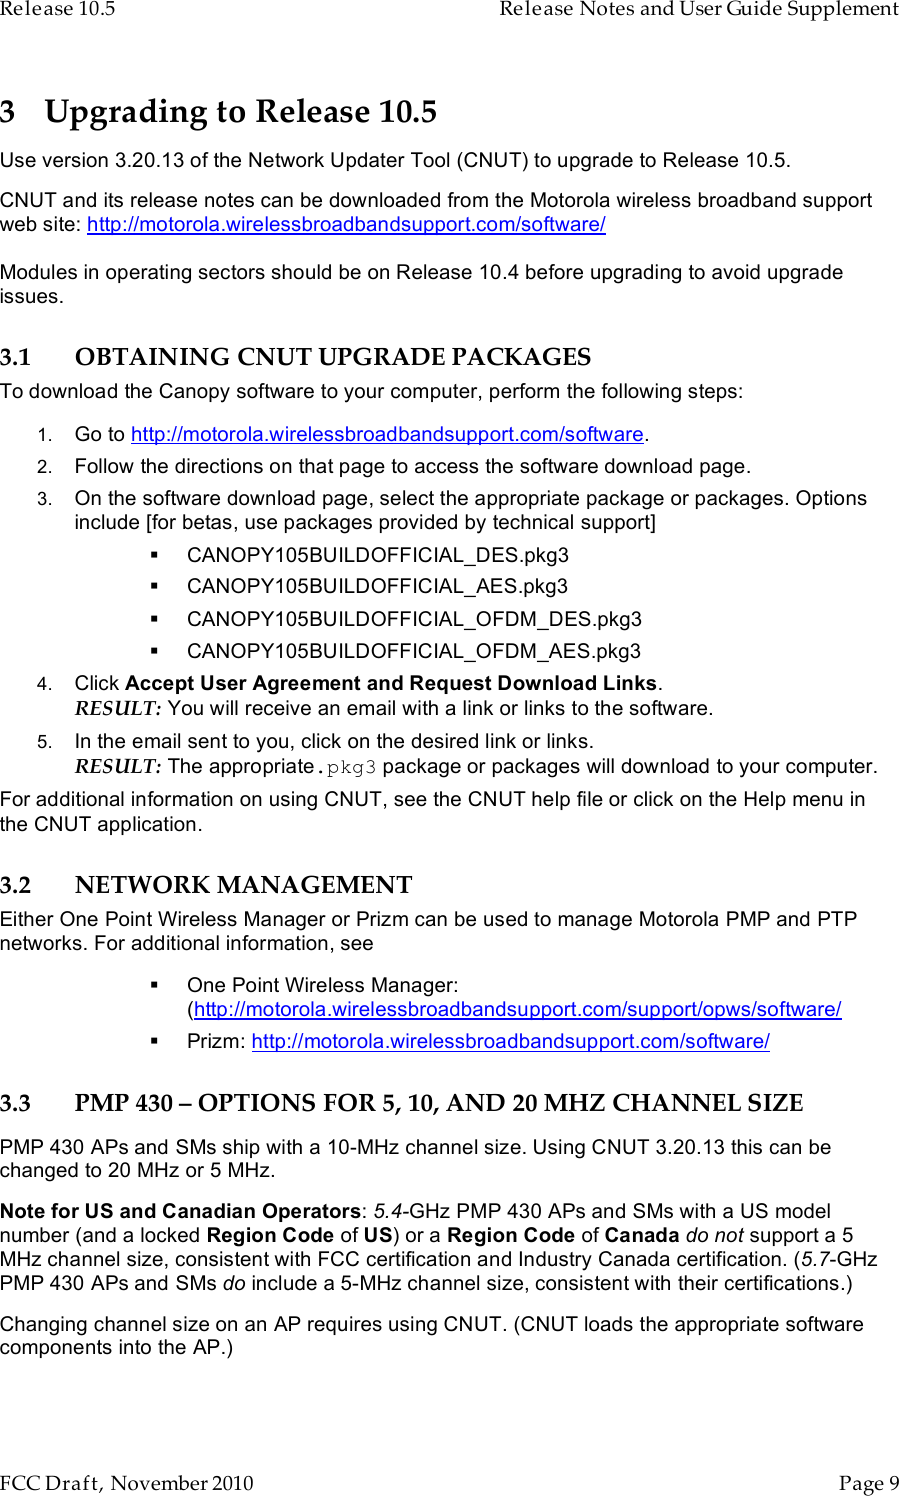 Release 10.5    Release Notes and User Guide Supplement      FCC Draft, November 2010  Page 9   3 Upgrading to Release 10.5 Use version 3.20.13 of the Network Updater Tool (CNUT) to upgrade to Release 10.5. CNUT and its release notes can be downloaded from the Motorola wireless broadband support web site: http://motorola.wirelessbroadbandsupport.com/software/  Modules in operating sectors should be on Release 10.4 before upgrading to avoid upgrade issues. 3.1 OBTAINING CNUT UPGRADE PACKAGES To download the Canopy software to your computer, perform the following steps: 1. Go to http://motorola.wirelessbroadbandsupport.com/software. 2. Follow the directions on that page to access the software download page.  3. On the software download page, select the appropriate package or packages. Options include [for betas, use packages provided by technical support]  CANOPY105BUILDOFFICIAL_DES.pkg3  CANOPY105BUILDOFFICIAL_AES.pkg3  CANOPY105BUILDOFFICIAL_OFDM_DES.pkg3  CANOPY105BUILDOFFICIAL_OFDM_AES.pkg3 4. Click Accept User Agreement and Request Download Links.  RESULT: You will receive an email with a link or links to the software. 5. In the email sent to you, click on the desired link or links. RESULT: The appropriate.pkg3 package or packages will download to your computer. For additional information on using CNUT, see the CNUT help file or click on the Help menu in the CNUT application. 3.2 NETWORK MANAGEMENT Either One Point Wireless Manager or Prizm can be used to manage Motorola PMP and PTP networks. For additional information, see   One Point Wireless Manager: (http://motorola.wirelessbroadbandsupport.com/support/opws/software/  Prizm: http://motorola.wirelessbroadbandsupport.com/software/ 3.3 PMP 430 – OPTIONS FOR 5, 10, AND 20 MHZ CHANNEL SIZE PMP 430 APs and SMs ship with a 10-MHz channel size. Using CNUT 3.20.13 this can be changed to 20 MHz or 5 MHz. Note for US and Canadian Operators: 5.4-GHz PMP 430 APs and SMs with a US model number (and a locked Region Code of US) or a Region Code of Canada do not support a 5 MHz channel size, consistent with FCC certification and Industry Canada certification. (5.7-GHz PMP 430 APs and SMs do include a 5-MHz channel size, consistent with their certifications.) Changing channel size on an AP requires using CNUT. (CNUT loads the appropriate software components into the AP.) 